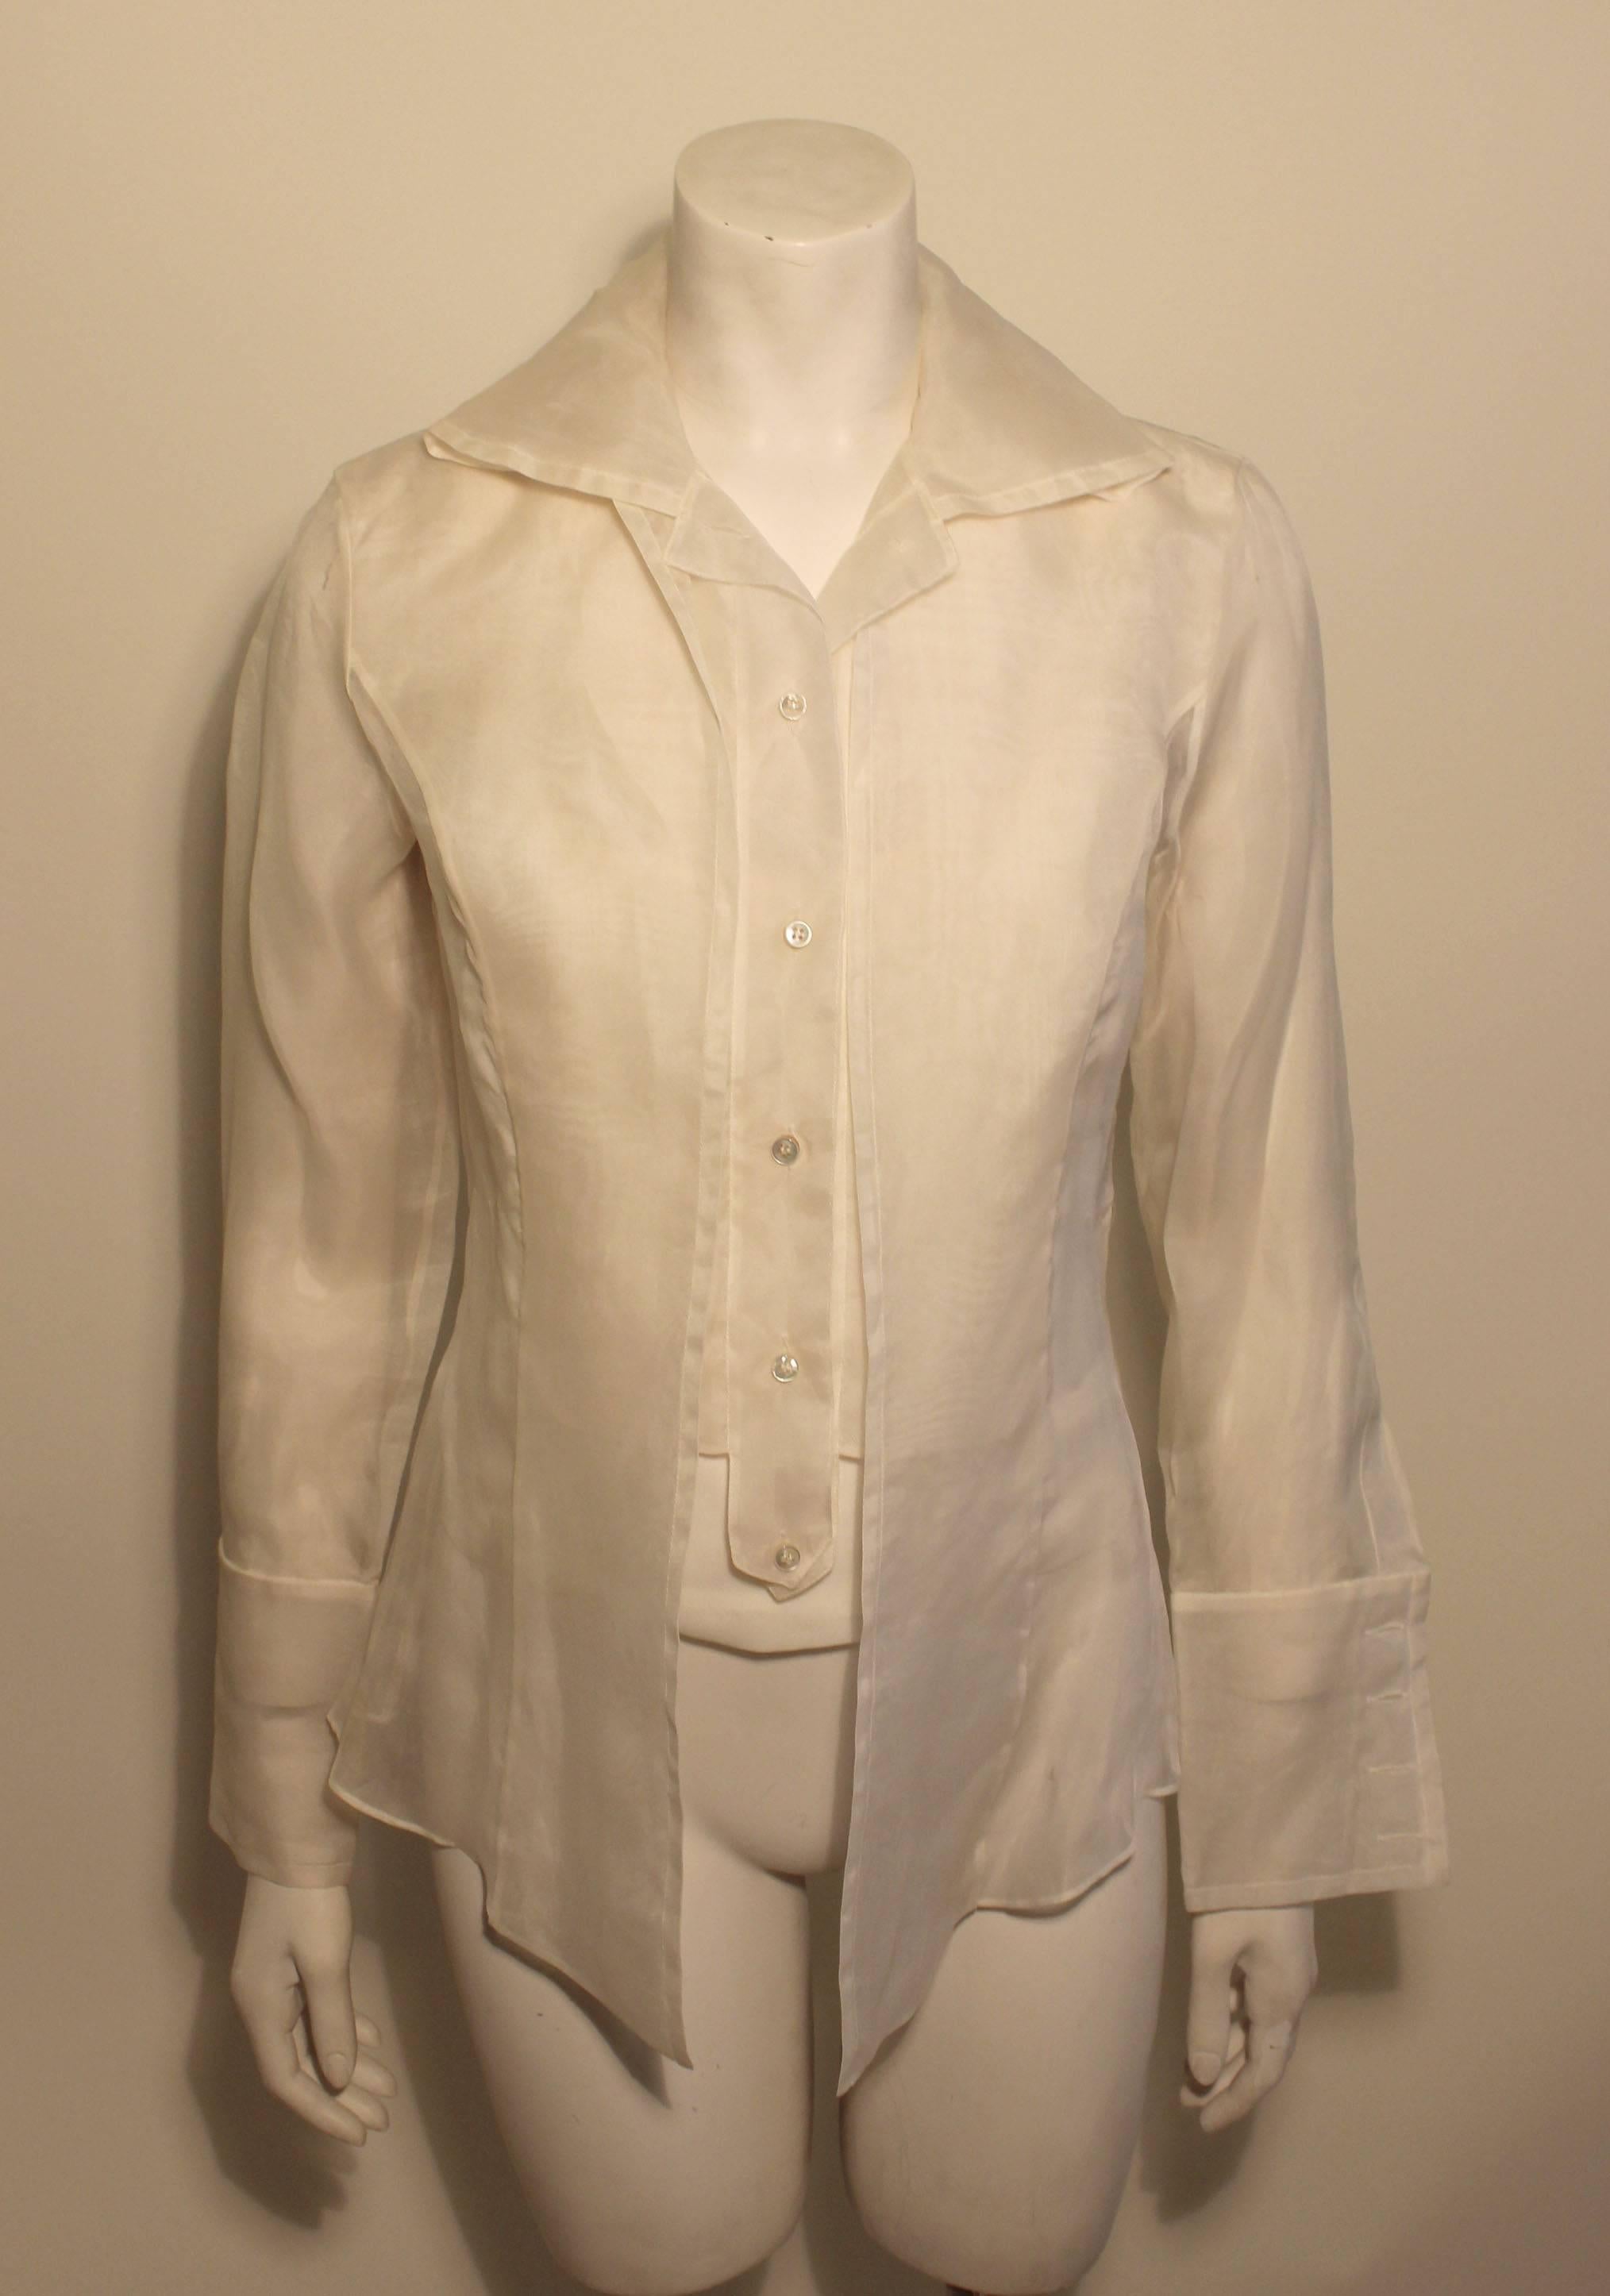 The lines of this 2 piece silk chiffon Gianfranco Ferre studio blouse are lovely. The front has a three layer effect with the camisole and a short vest like insert under a longer blouse with a peplum back. There is a generous cuff with 4 buttons at